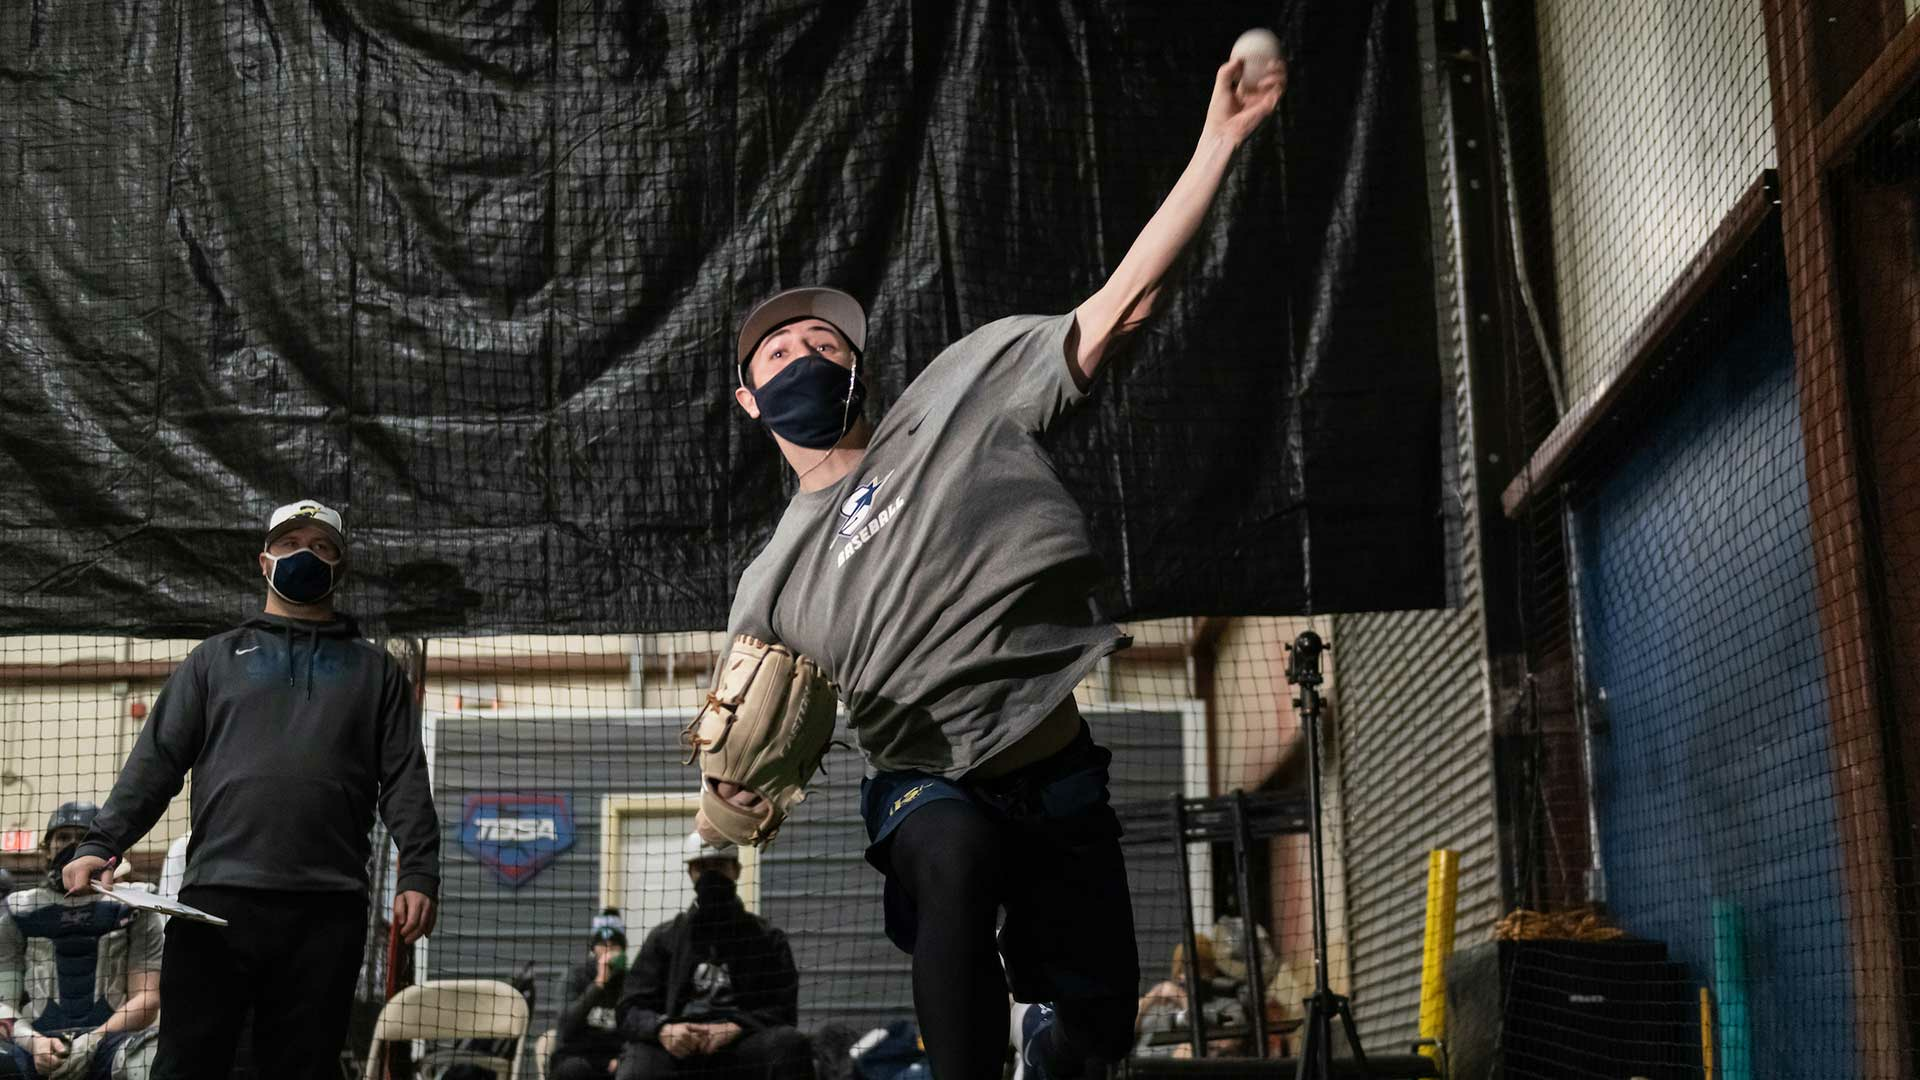 student practicing throwing